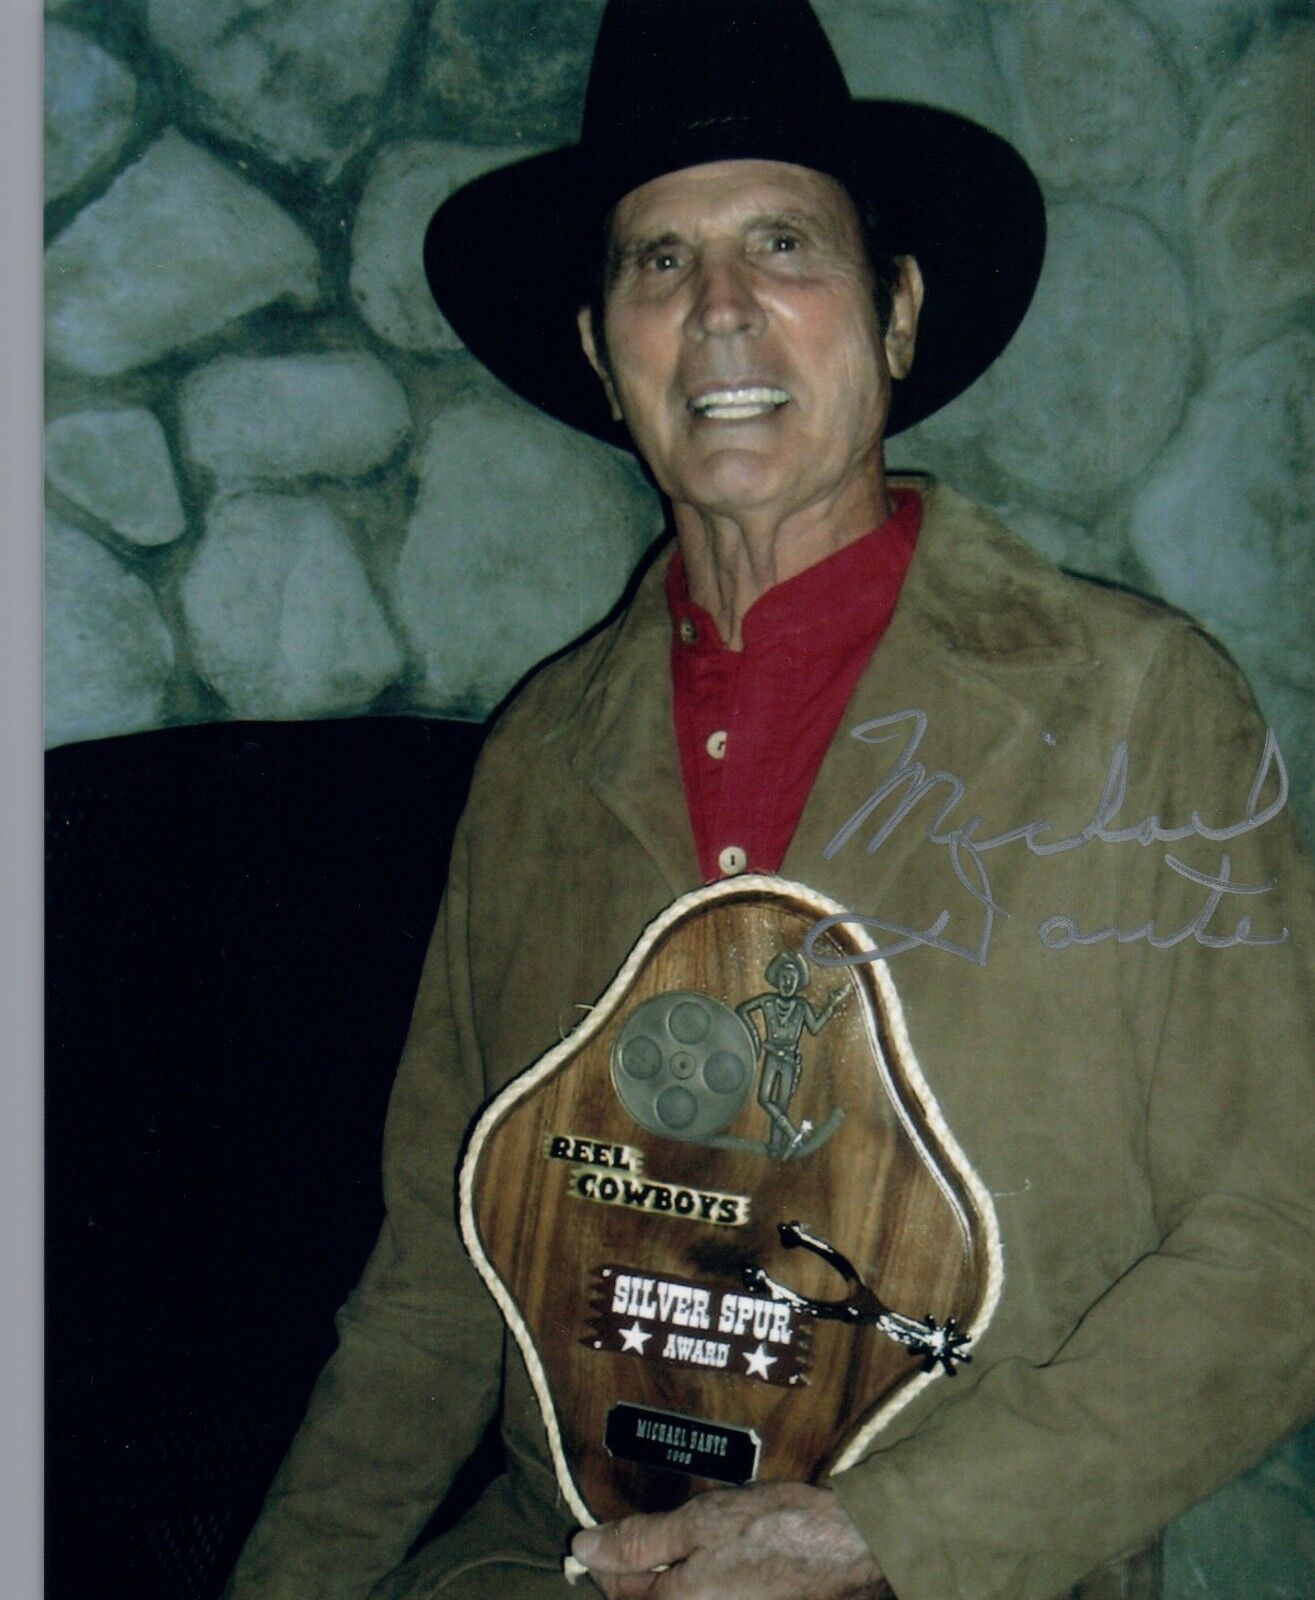 Michael Dante Signed Autograph Star Trek & Country Western Actor 8x10 Photo Poster painting COA